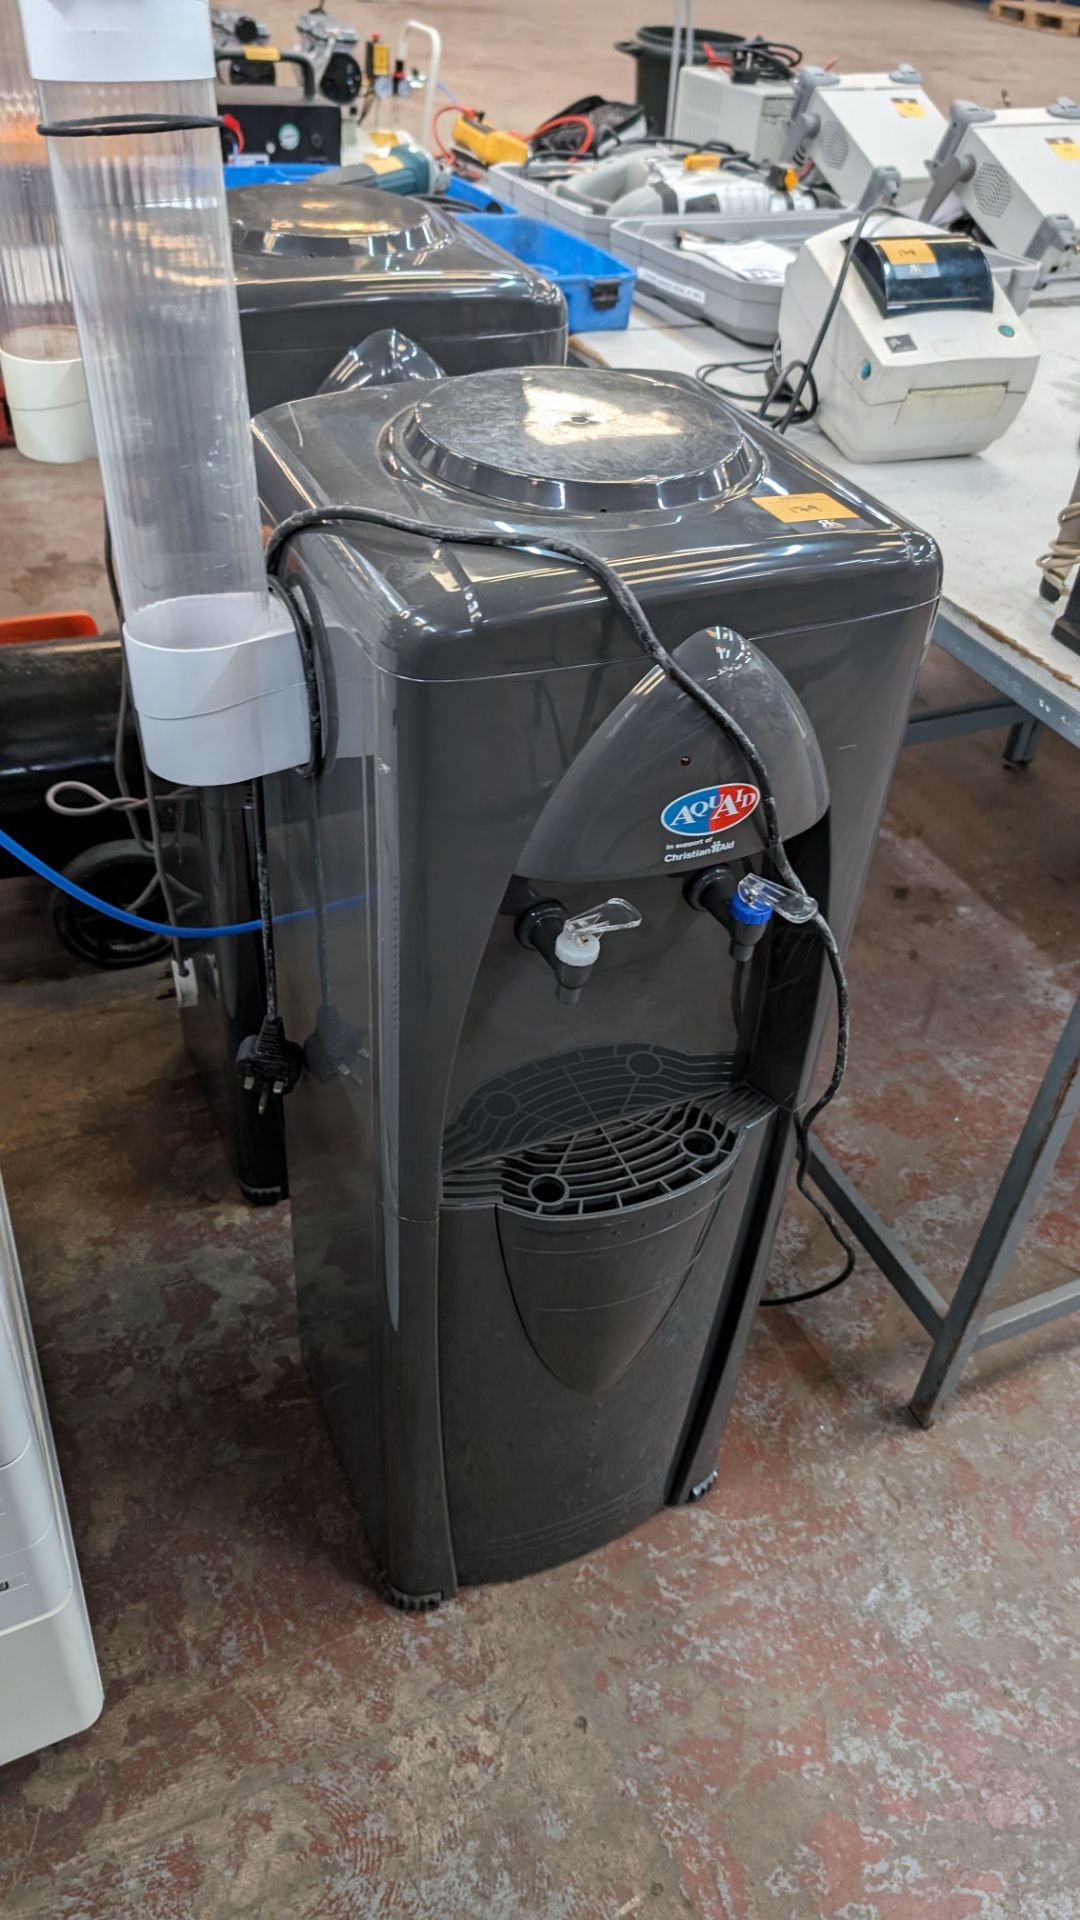 2 off floor standing water coolers, for connection to the water mains supply - Image 3 of 7